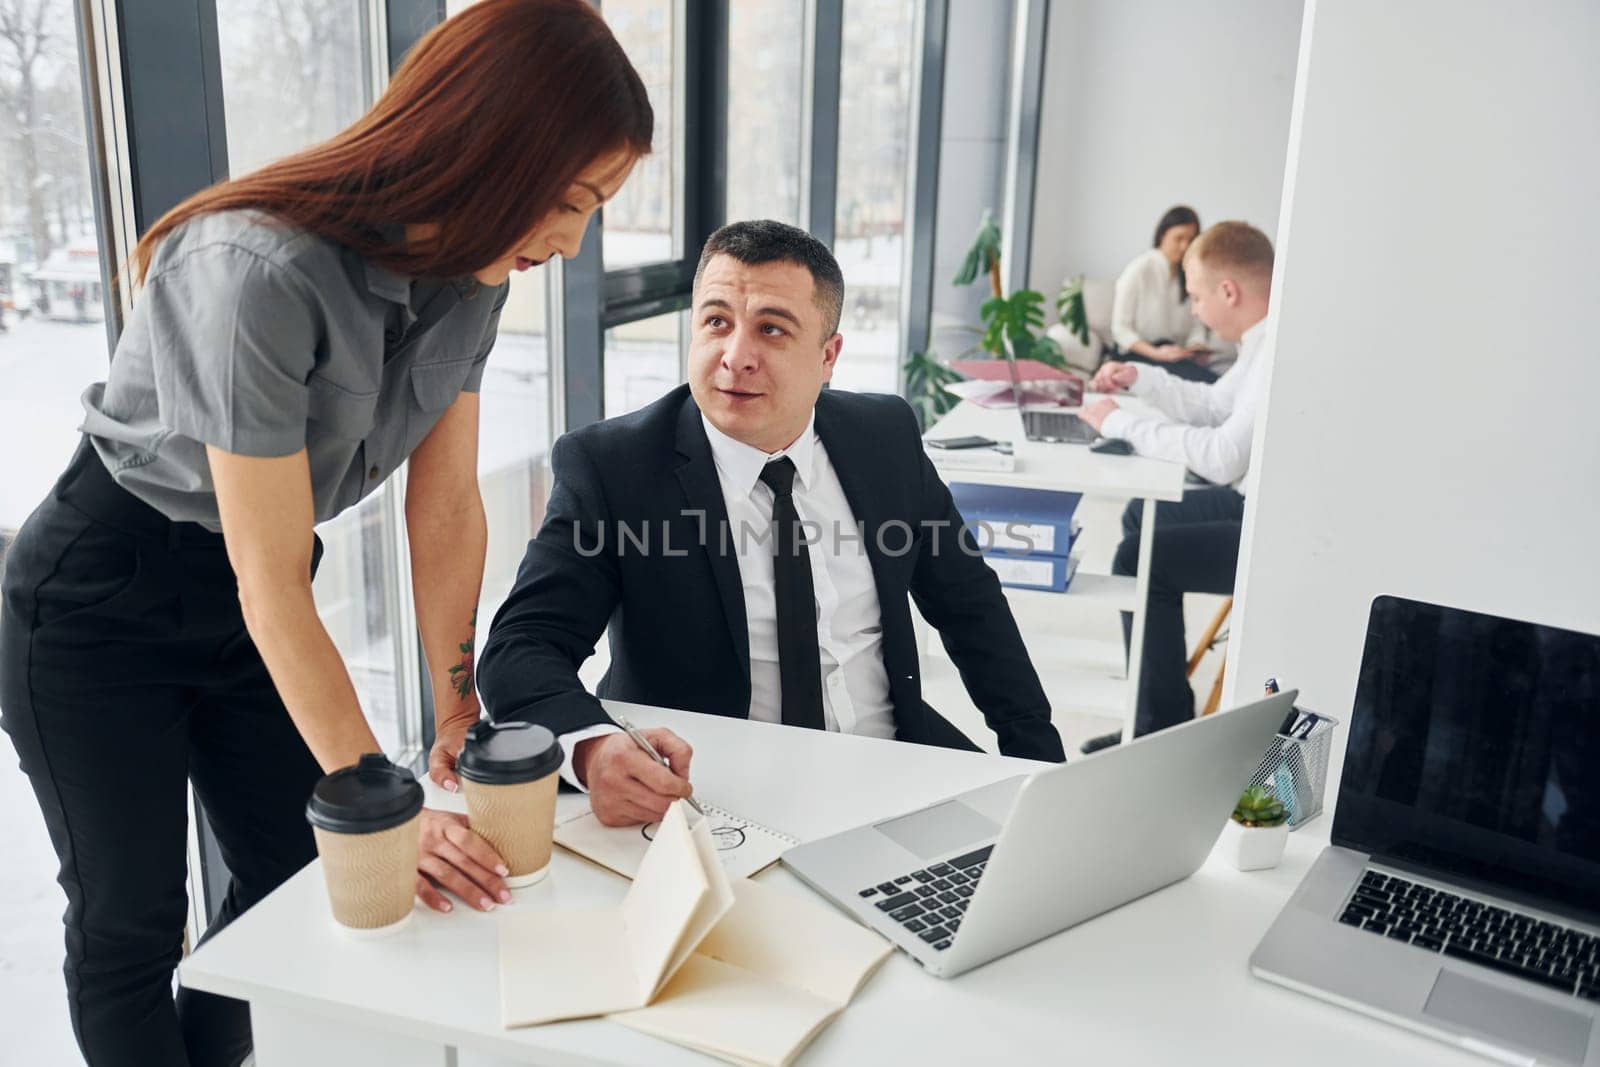 Works by using laptop. Group of people in official formal clothes that is indoors in the office by Standret